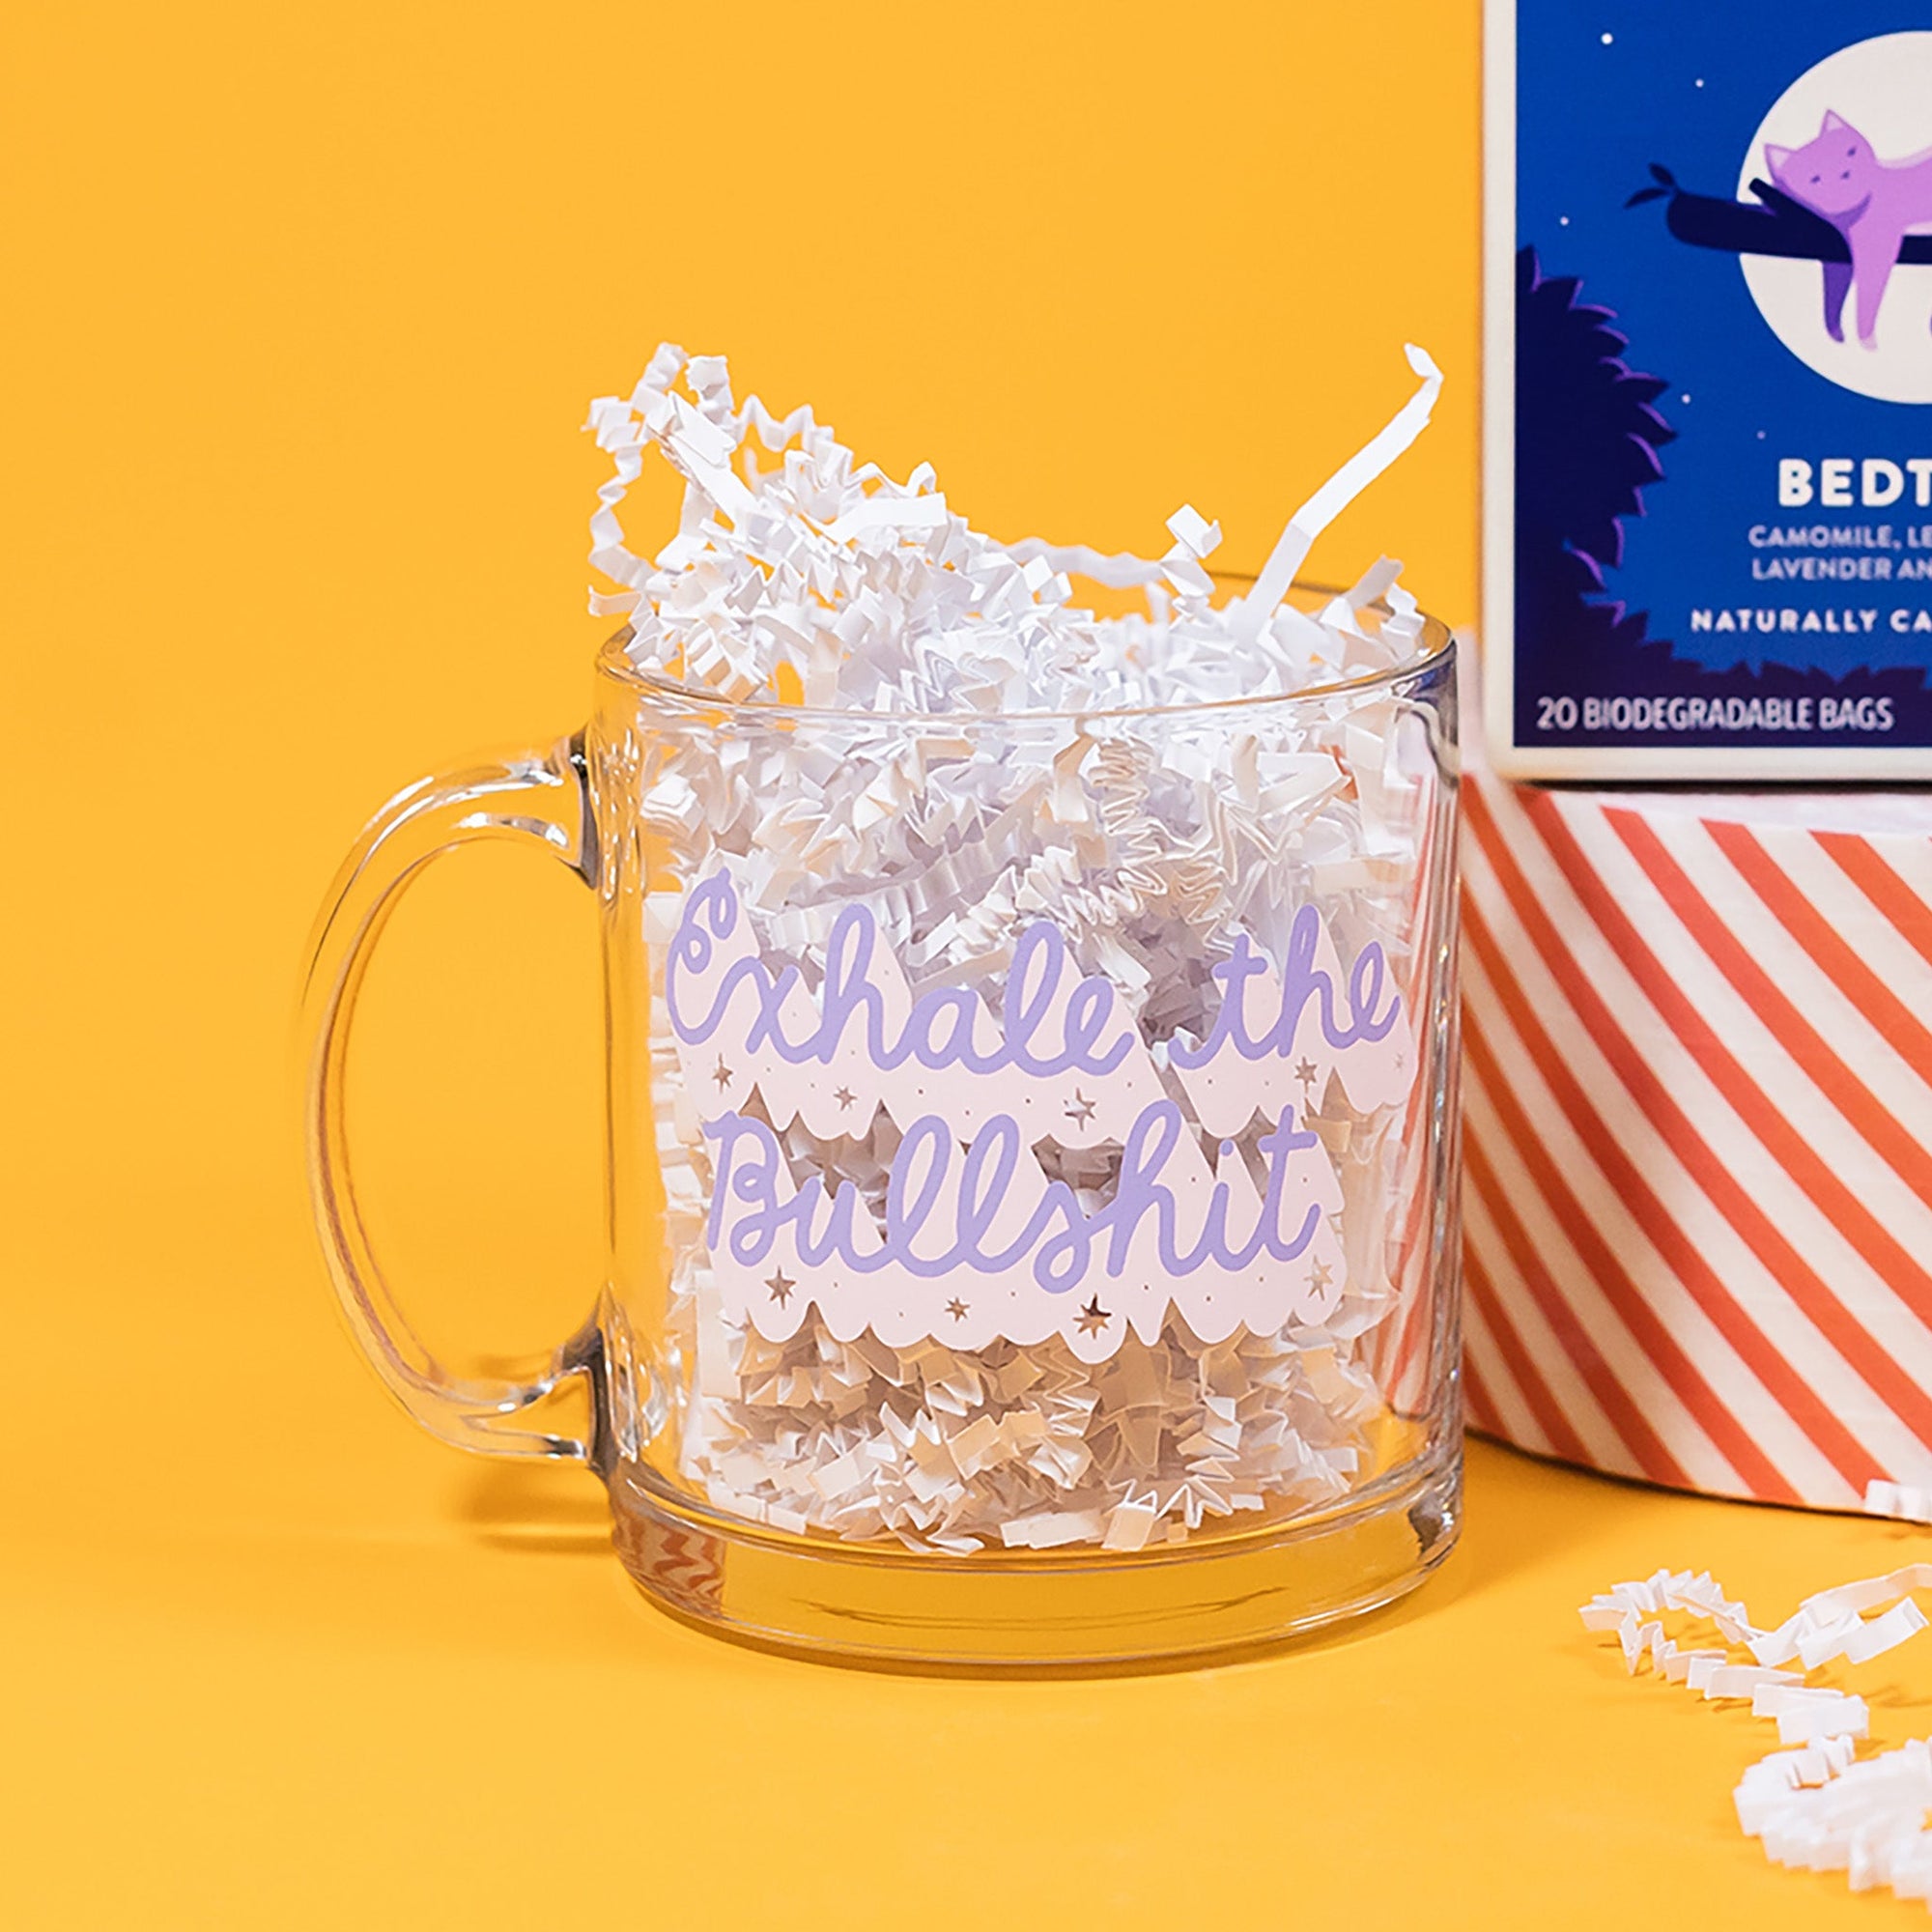 On a sunny mustard background sits a mug with white crinkle in it. This clear mug says "Exhale the Bullshit" in a dark lavender, handwritten script lettering. It has a light lavender dropshadow and stars and dots around the wording.